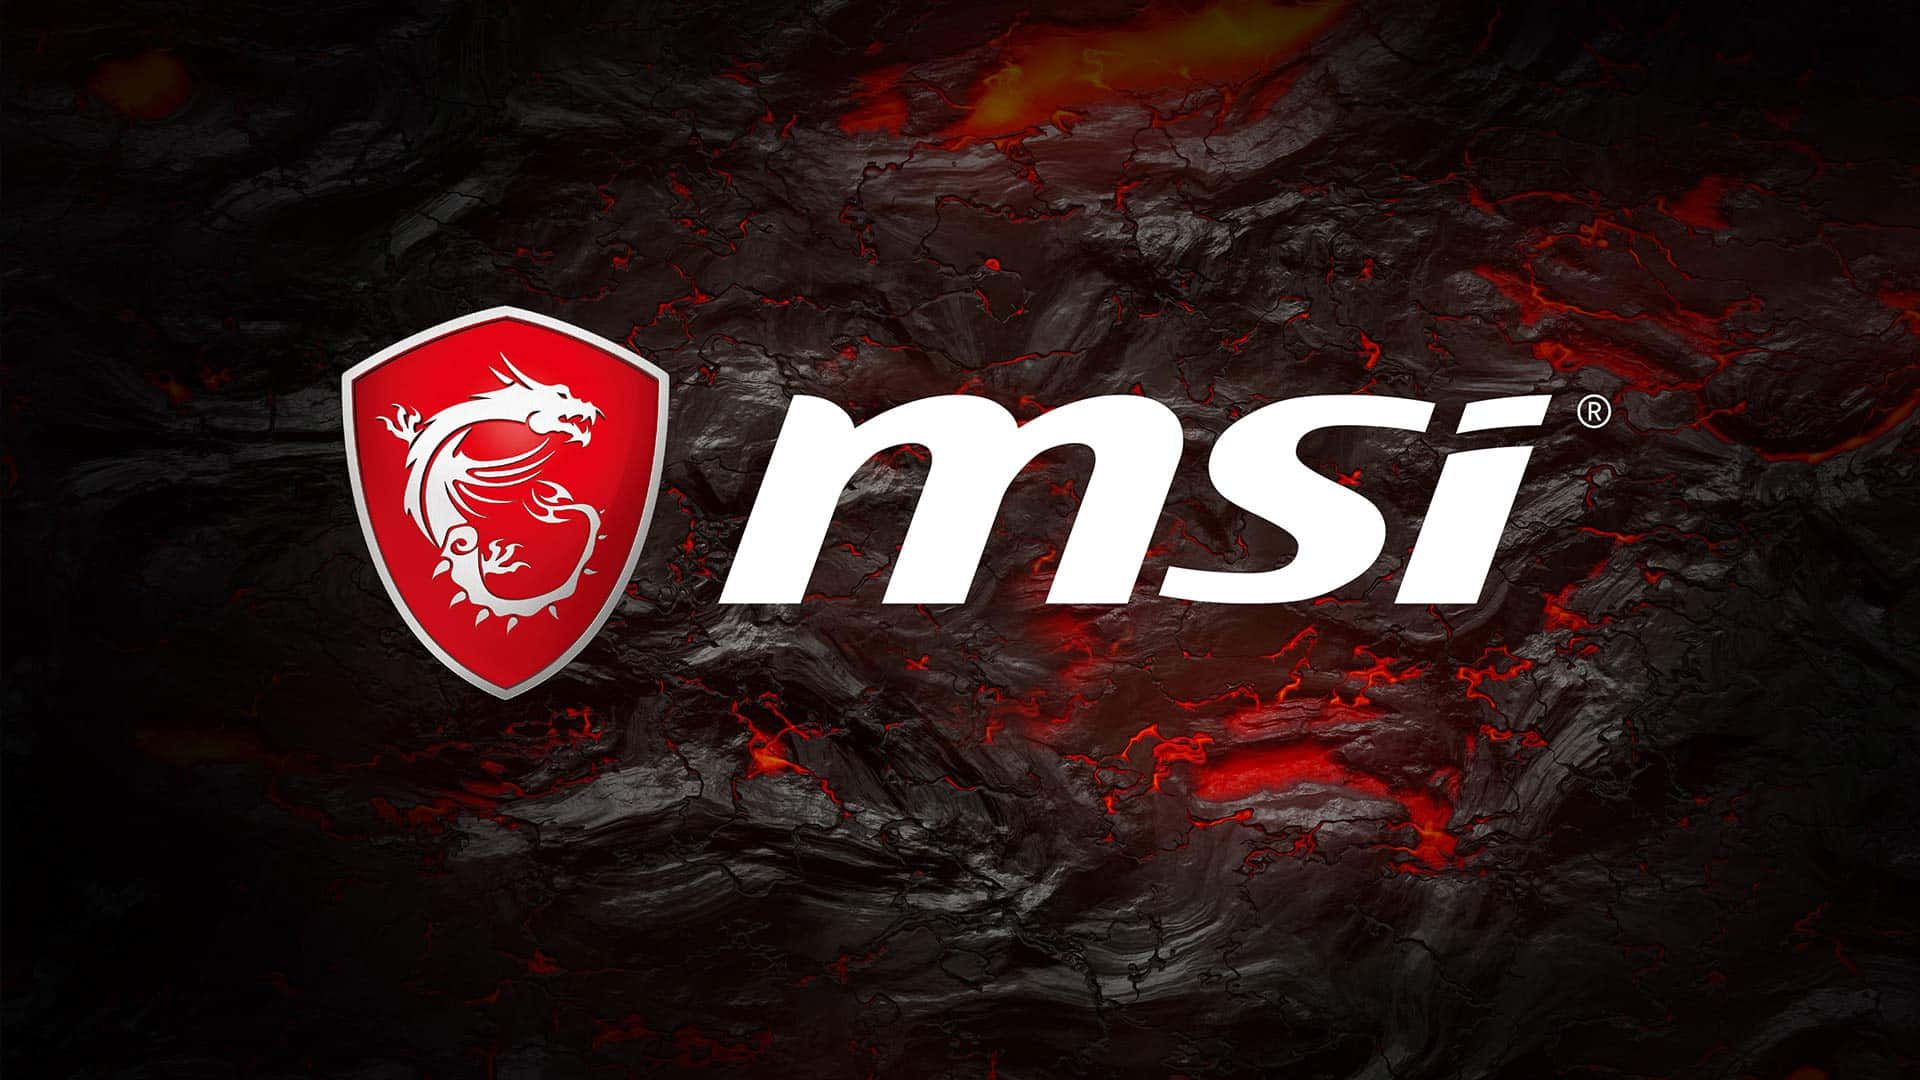 Experience the excellence of MSI with high-grade gaming components.